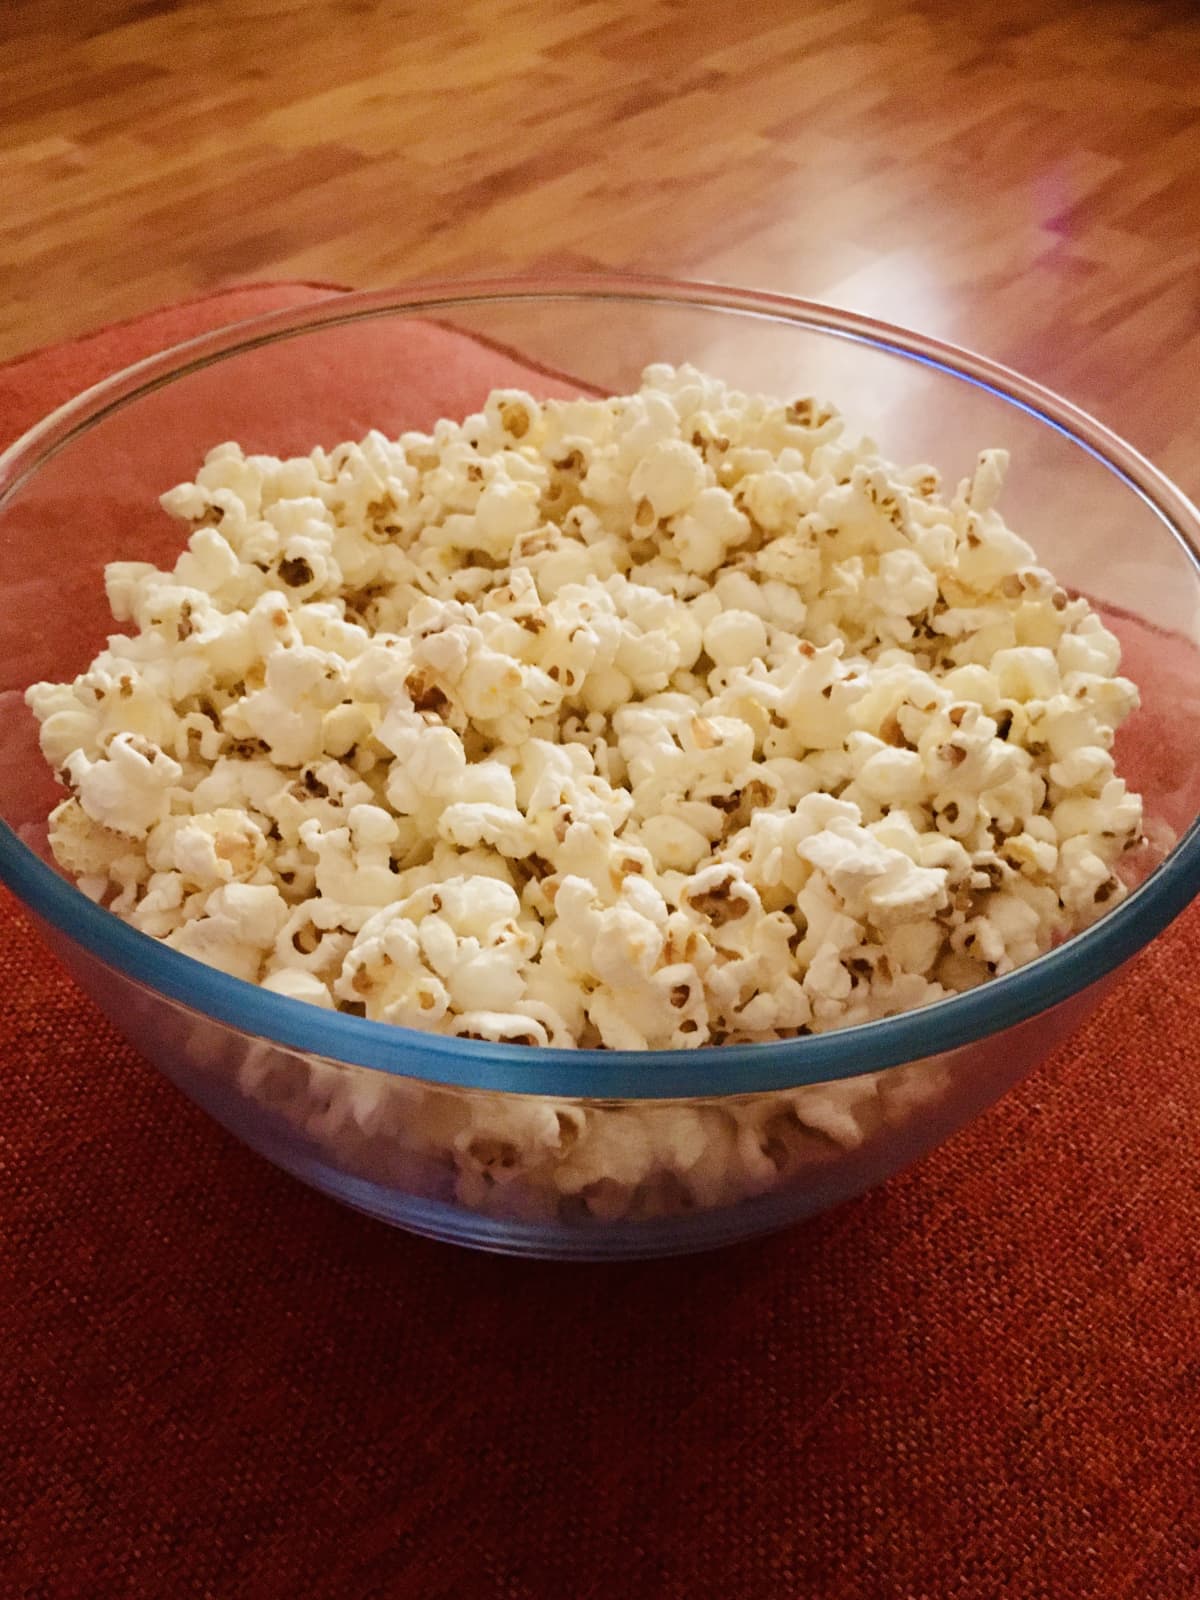 Freshly prepared popcorn in a glass bowl on a red surface